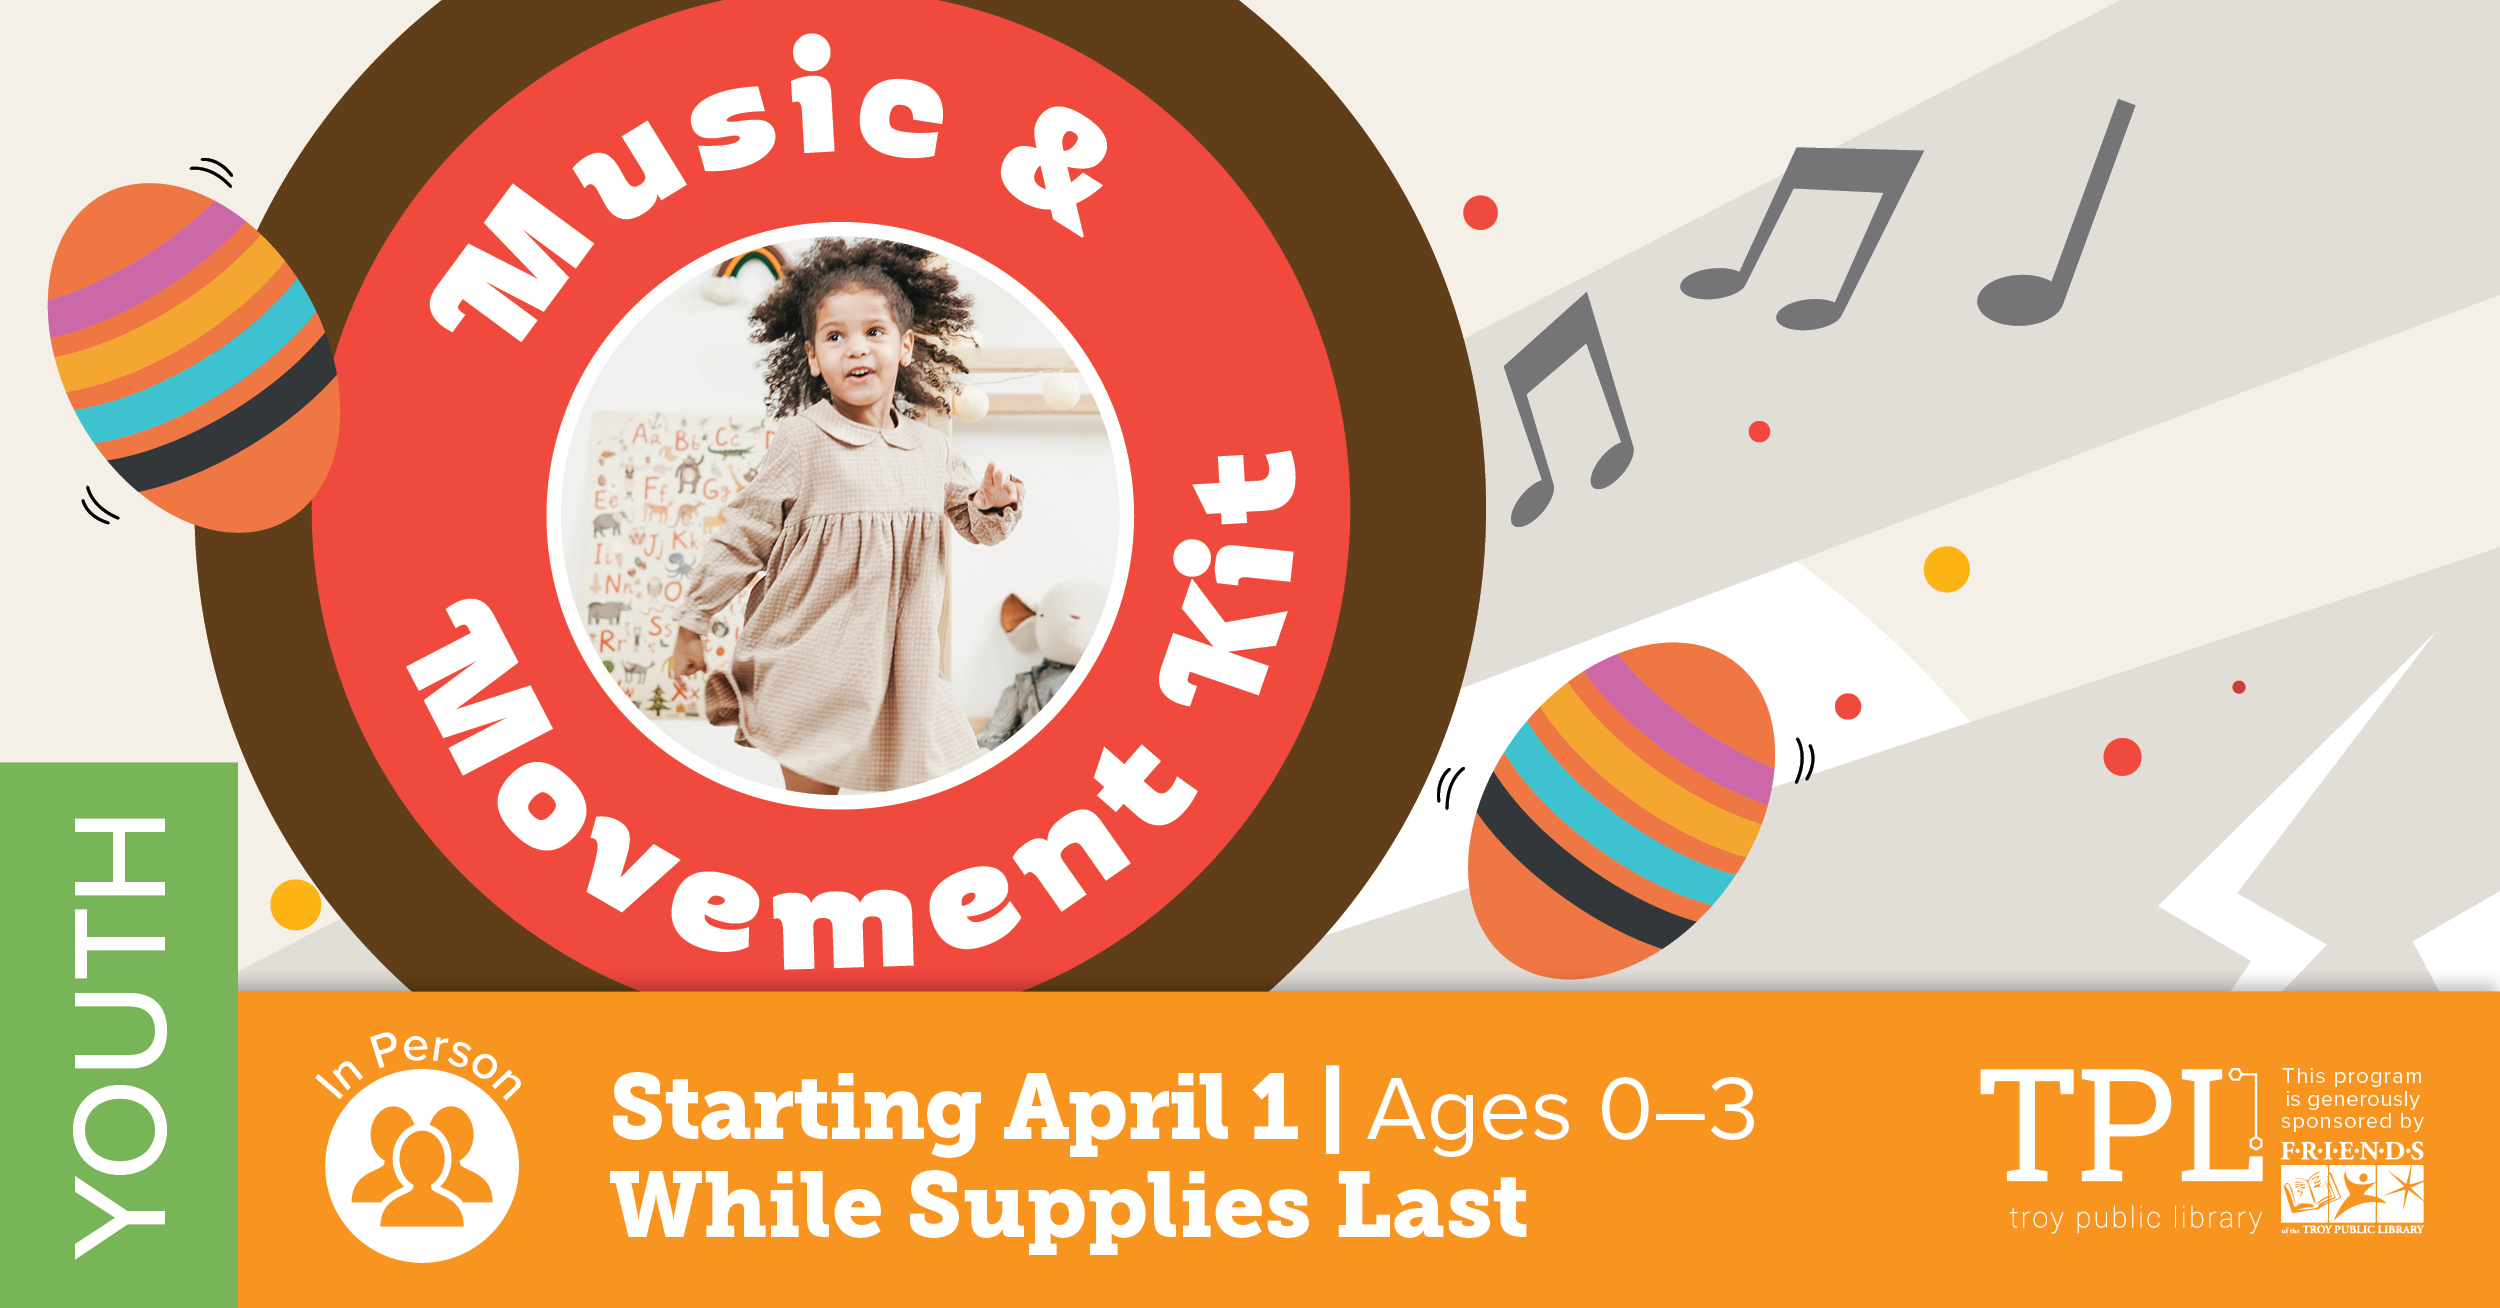 Music and Movement Kit. Starting April 1, while supplies last. For ages 0-3. Sponsored by the Friends of the Troy Public Library. 